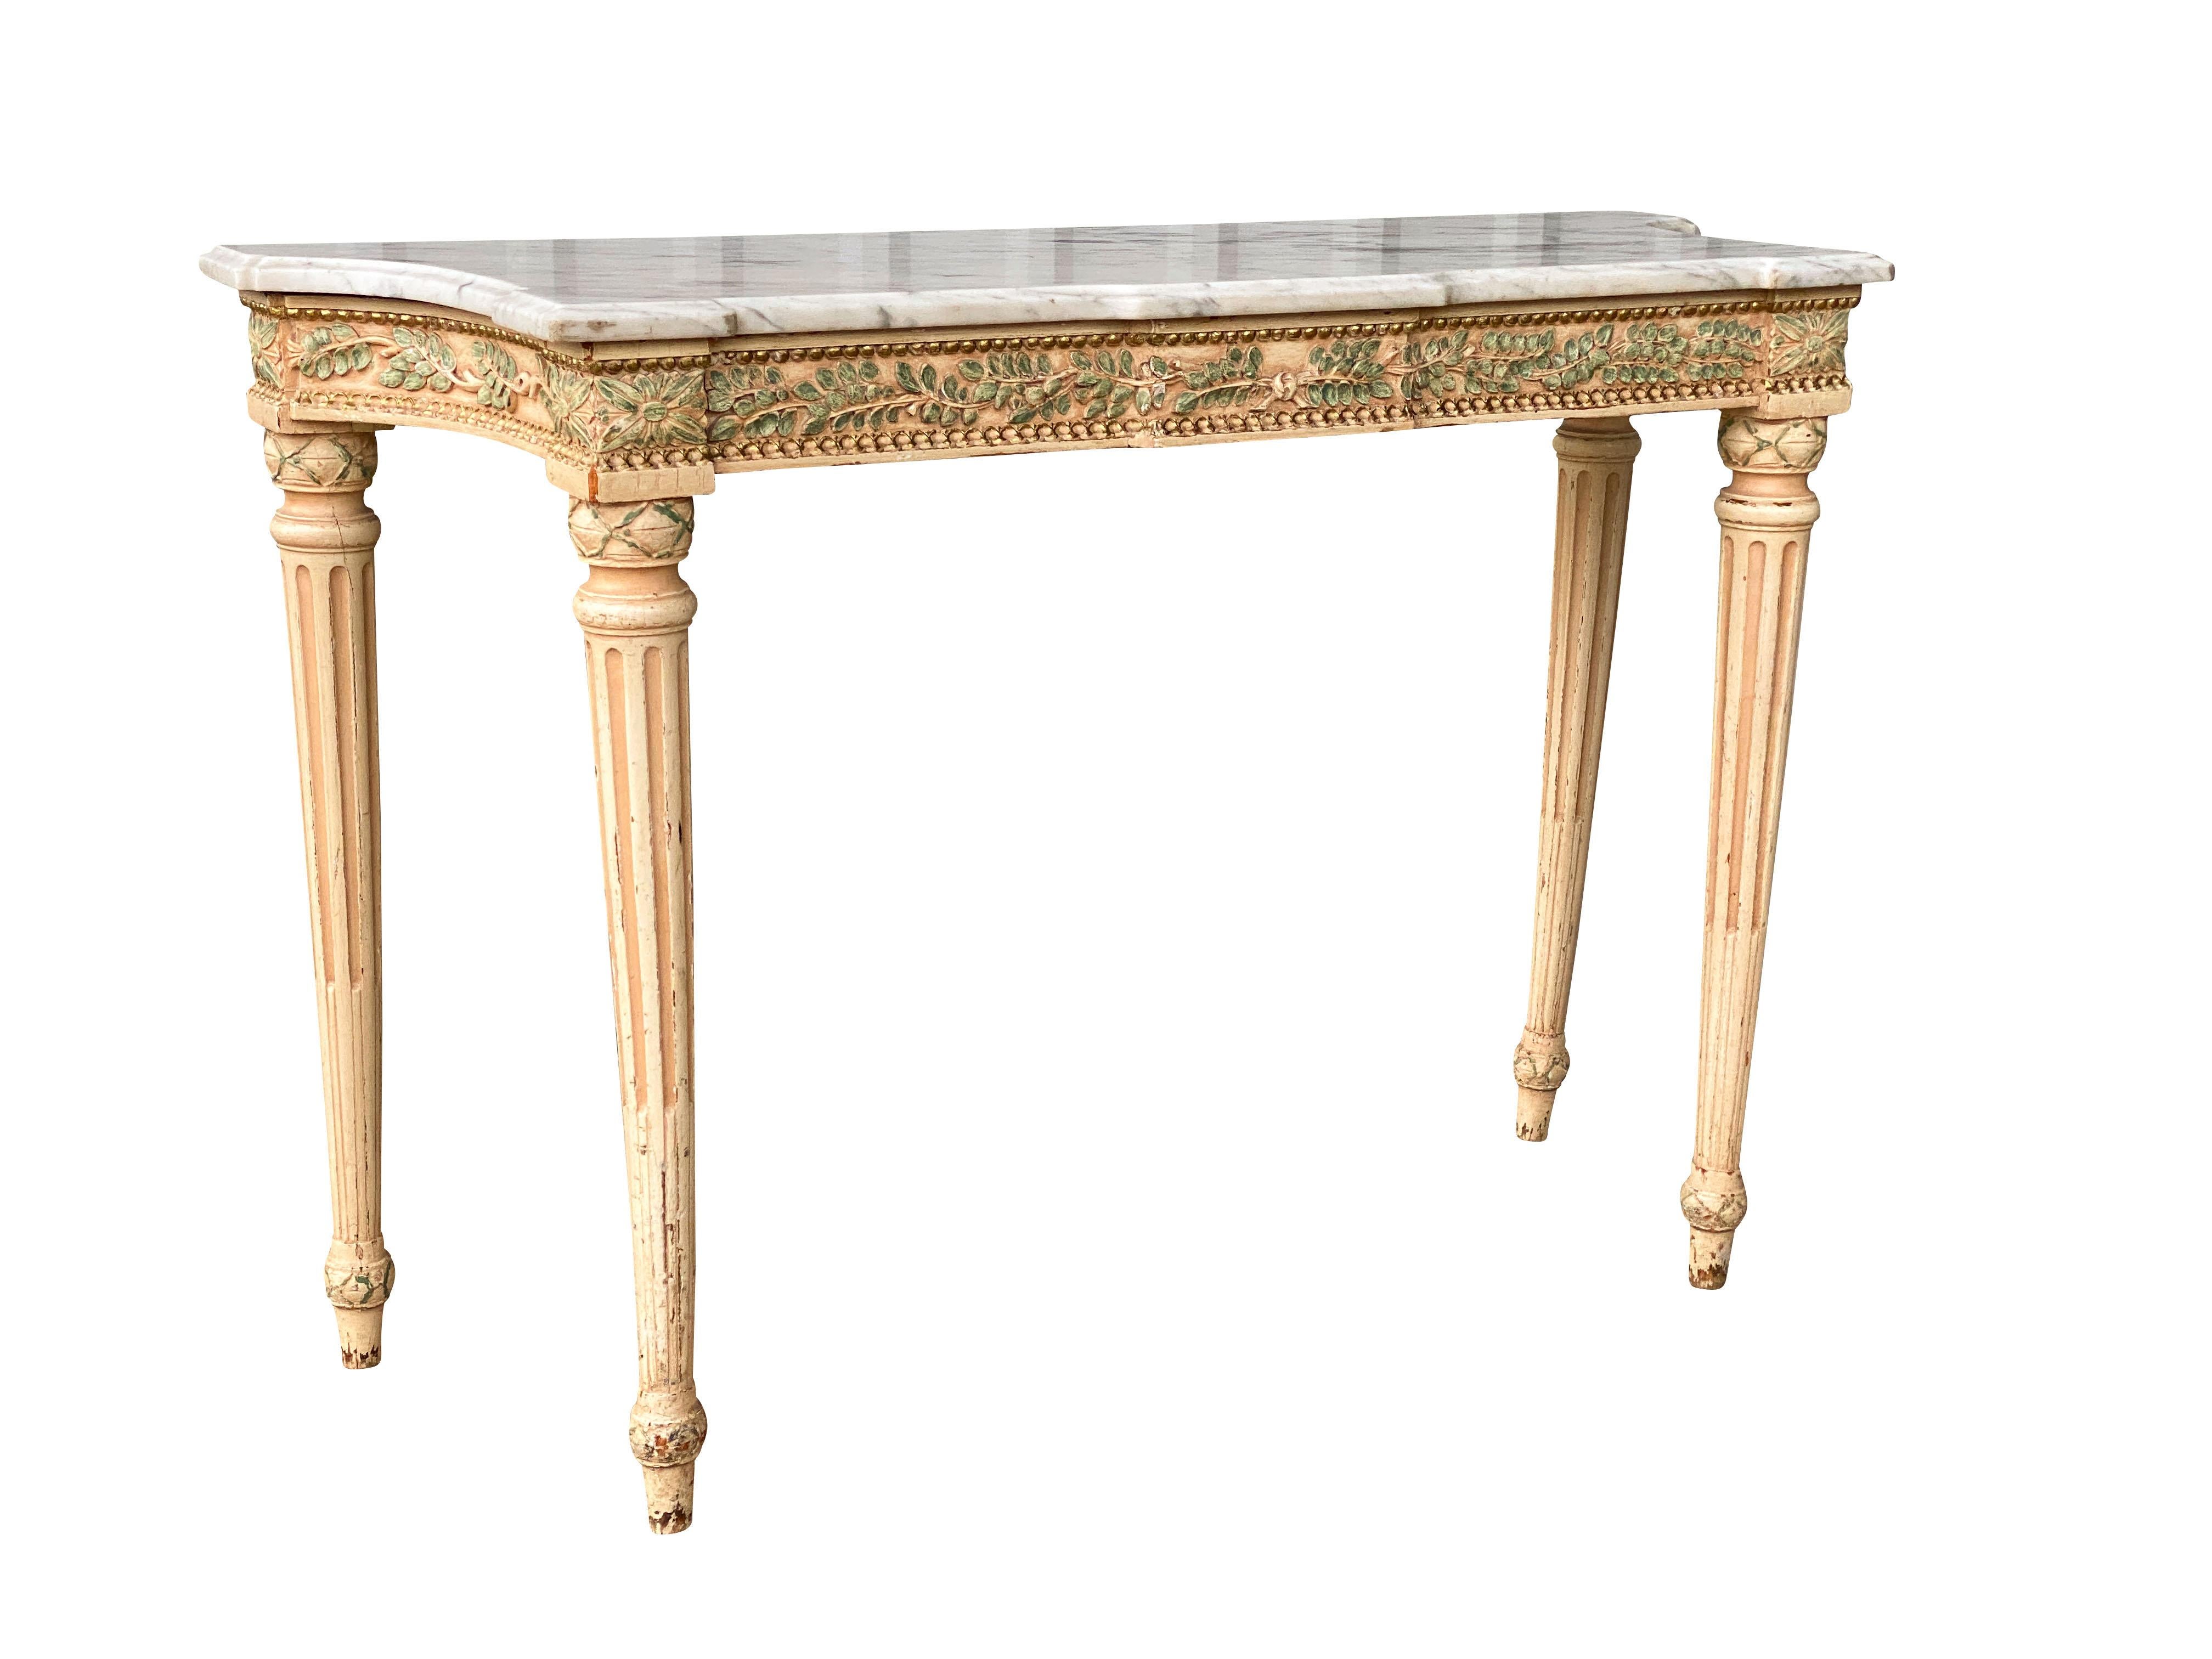 Shaped rectangular white and grey marble top over a conforming frieze carved with green painted laurel leaves and raised on circular tapered stop fluted legs. Provenance; Waldorf Towers NYC. Original 1931 furnishing. See a very similar table in